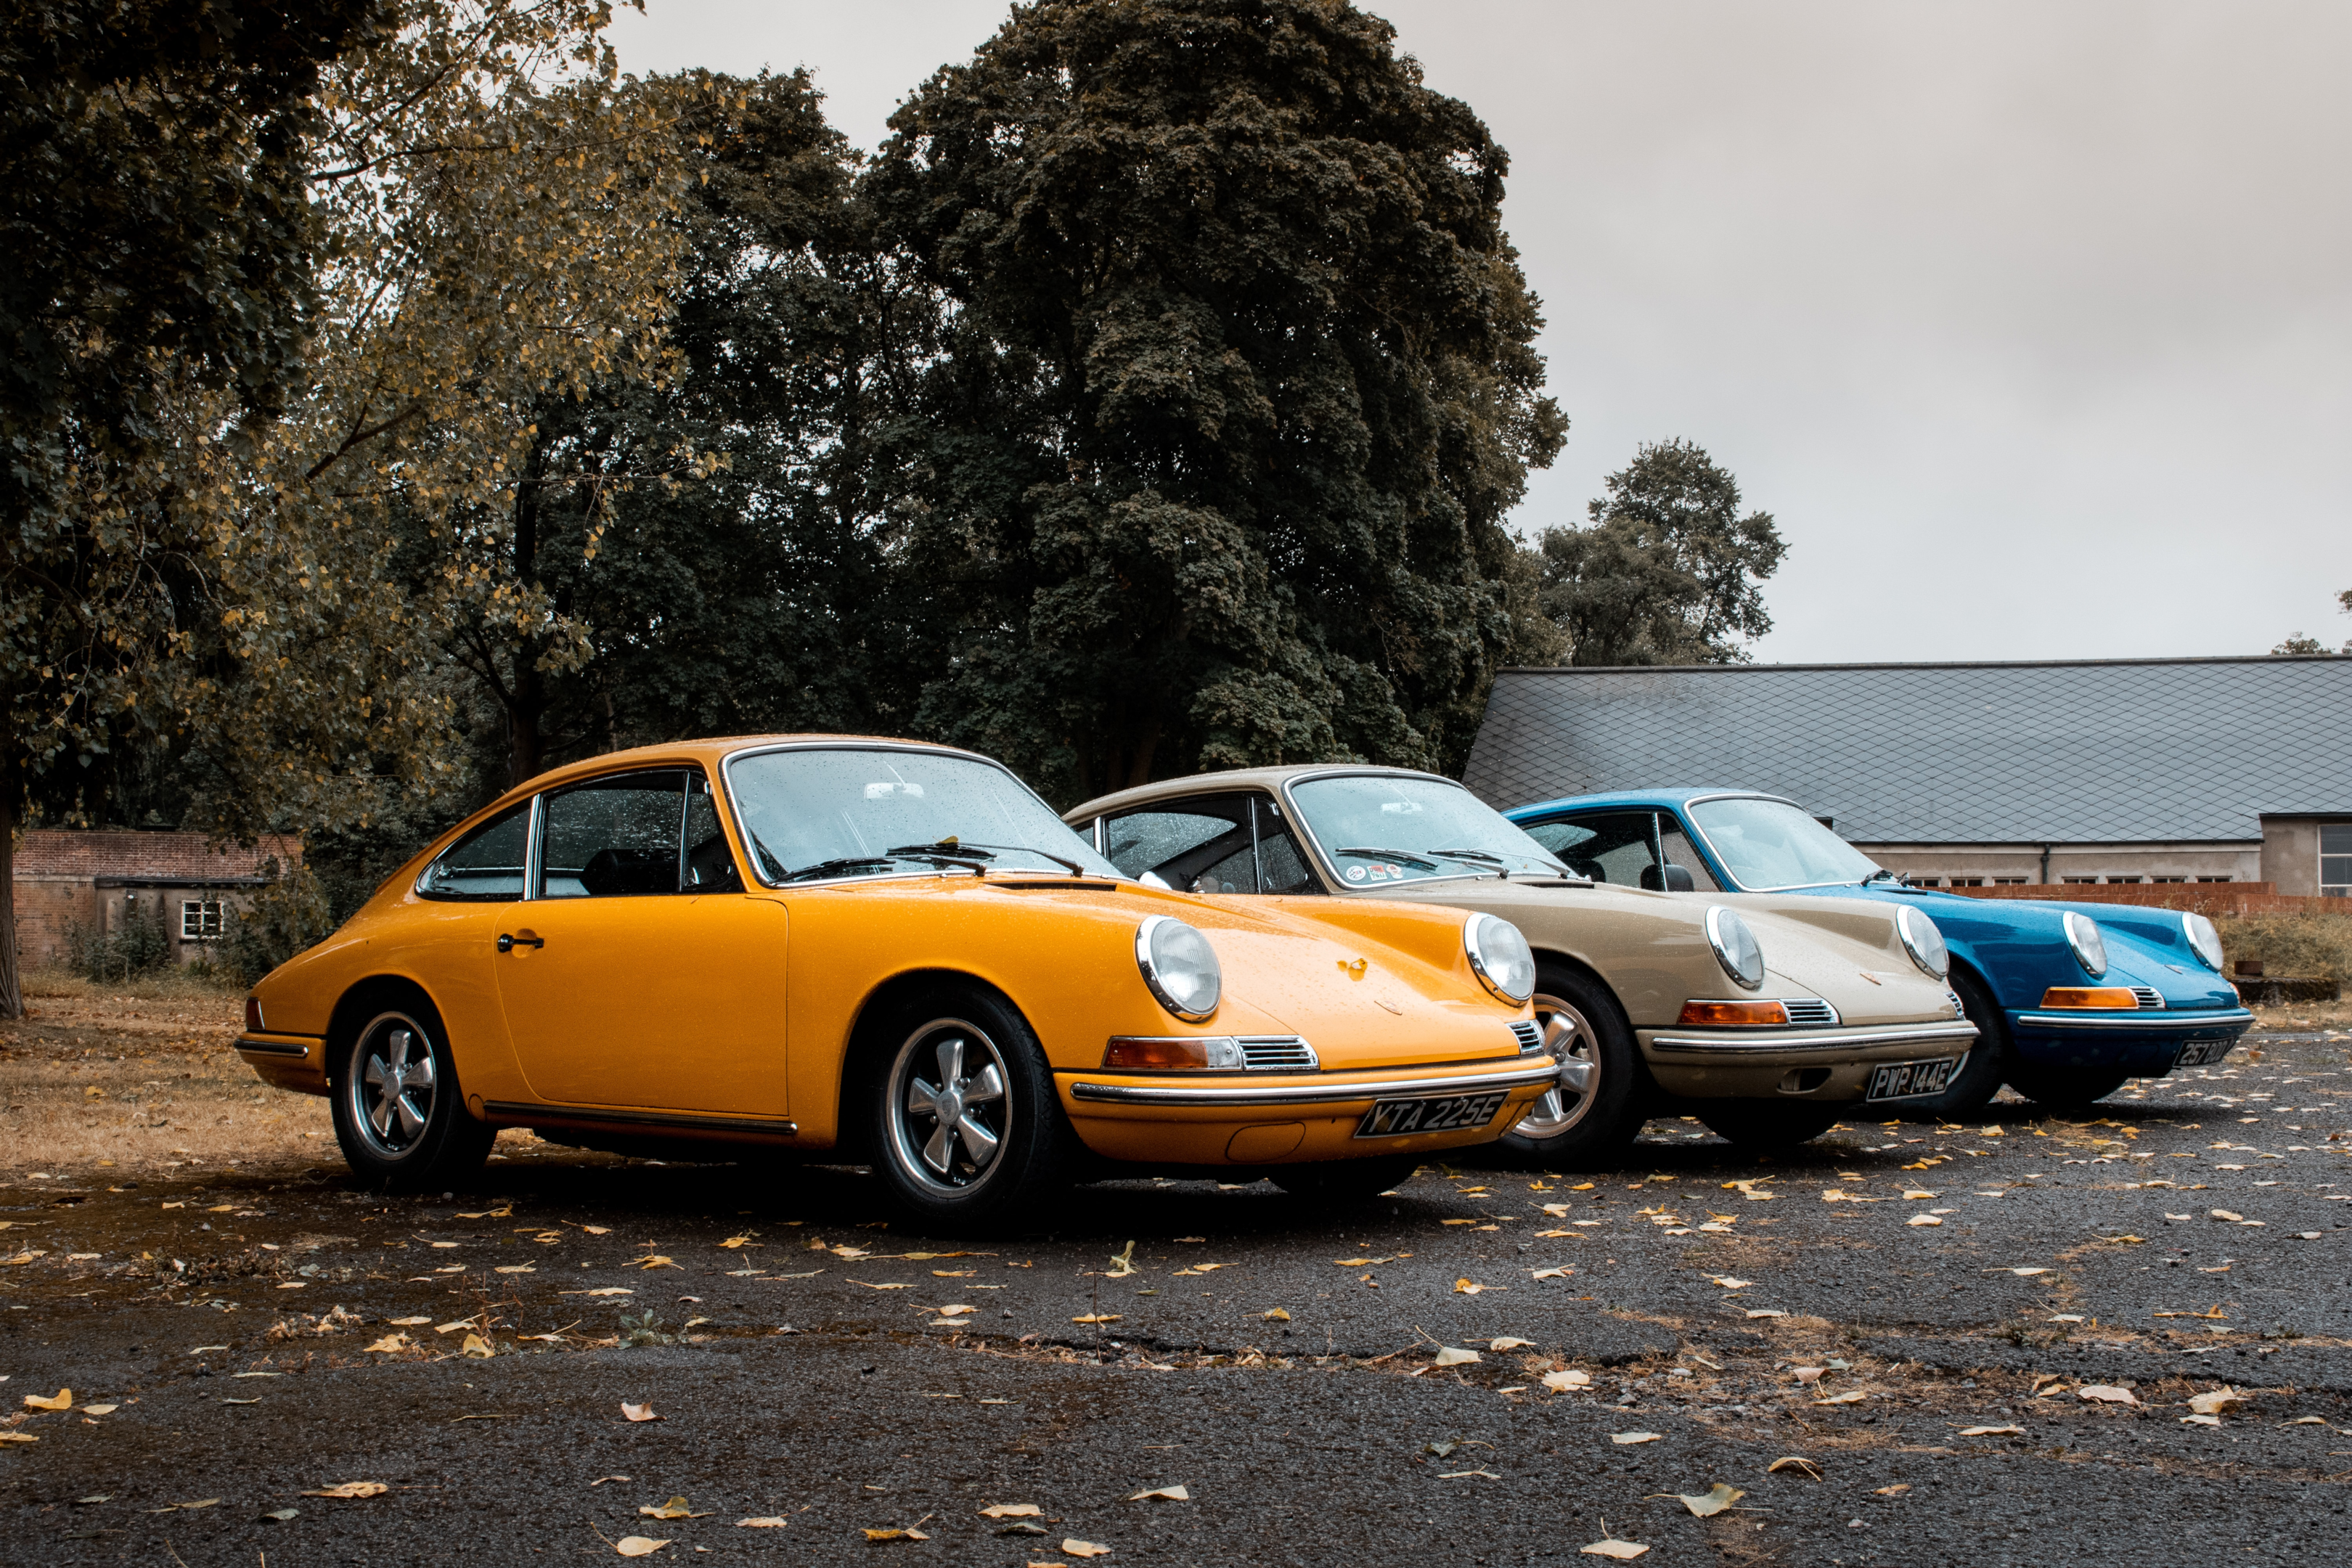 Three 1960s Porsche 911's parked in a parking lot. As the auto transport industry leader, NTS provides both open and enclosed transport.